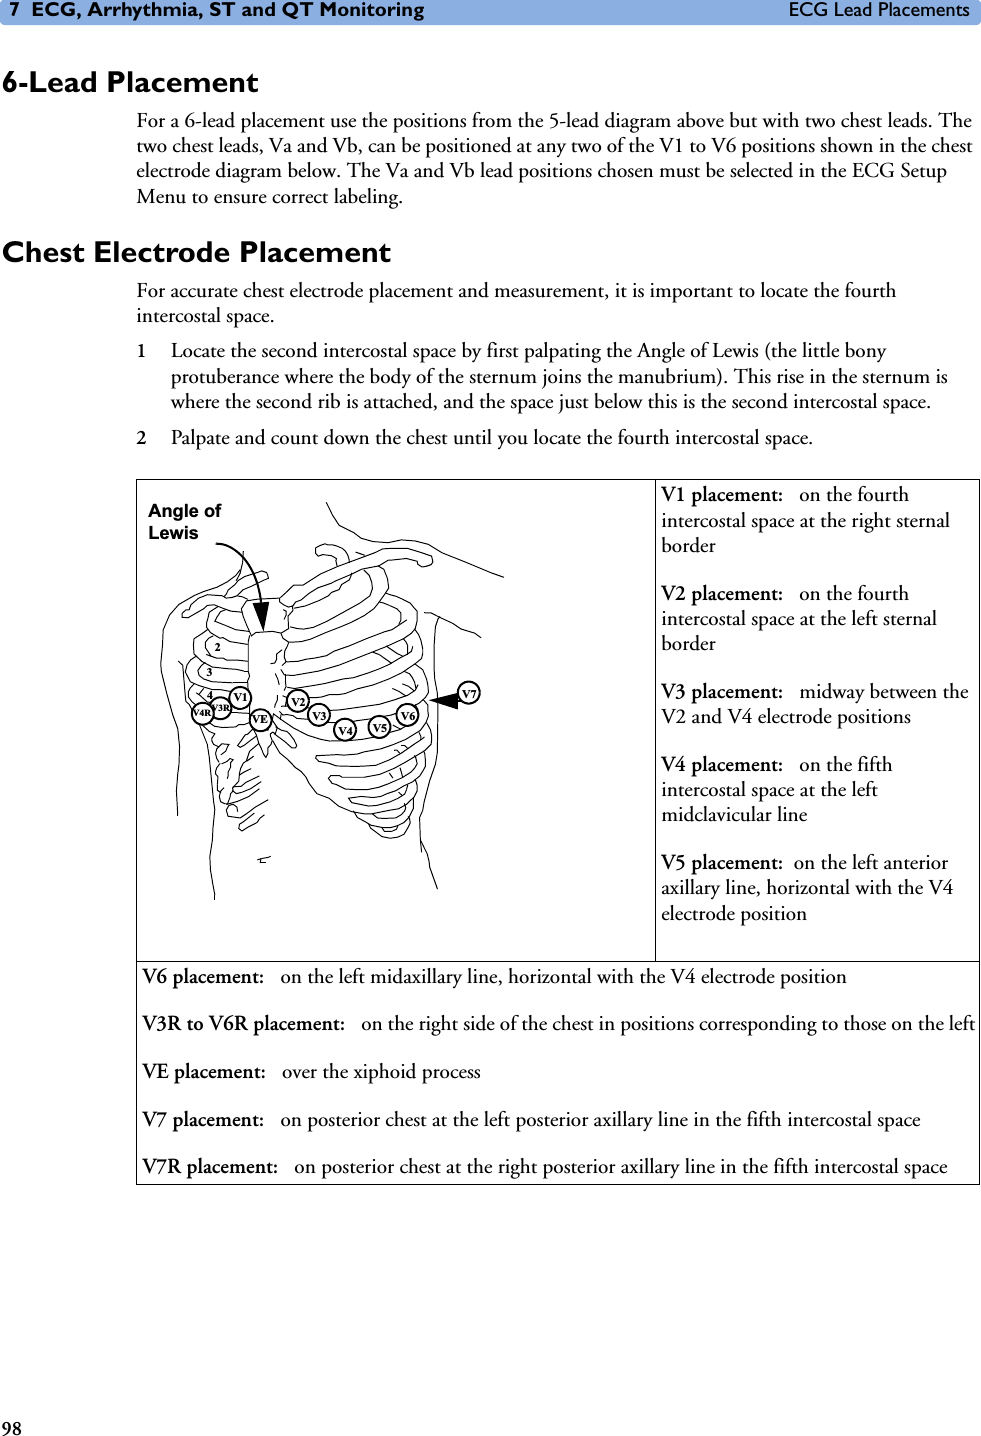 7 ECG, Arrhythmia, ST and QT Monitoring ECG Lead Placements986-Lead PlacementFor a 6-lead placement use the positions from the 5-lead diagram above but with two chest leads. The two chest leads, Va and Vb, can be positioned at any two of the V1 to V6 positions shown in the chest electrode diagram below. The Va and Vb lead positions chosen must be selected in the ECG Setup Menu to ensure correct labeling. Chest Electrode PlacementFor accurate chest electrode placement and measurement, it is important to locate the fourth intercostal space. 1Locate the second intercostal space by first palpating the Angle of Lewis (the little bony protuberance where the body of the sternum joins the manubrium). This rise in the sternum is where the second rib is attached, and the space just below this is the second intercostal space. 2Palpate and count down the chest until you locate the fourth intercostal space.V1 placement:  on the fourth intercostal space at the right sternal borderV2 placement:  on the fourth intercostal space at the left sternal borderV3 placement:  midway between the V2 and V4 electrode positionsV4 placement:  on the fifth intercostal space at the left midclavicular lineV5 placement: on the left anterior axillary line, horizontal with the V4 electrode positionV6 placement:  on the left midaxillary line, horizontal with the V4 electrode positionV3R to V6R placement:  on the right side of the chest in positions corresponding to those on the leftVE placement:  over the xiphoid processV7 placement:  on posterior chest at the left posterior axillary line in the fifth intercostal spaceV7R placement:  on posterior chest at the right posterior axillary line in the fifth intercostal spaceVEV1 V2V3V4 V5V6V7V3RV4R234Angle of Lewis